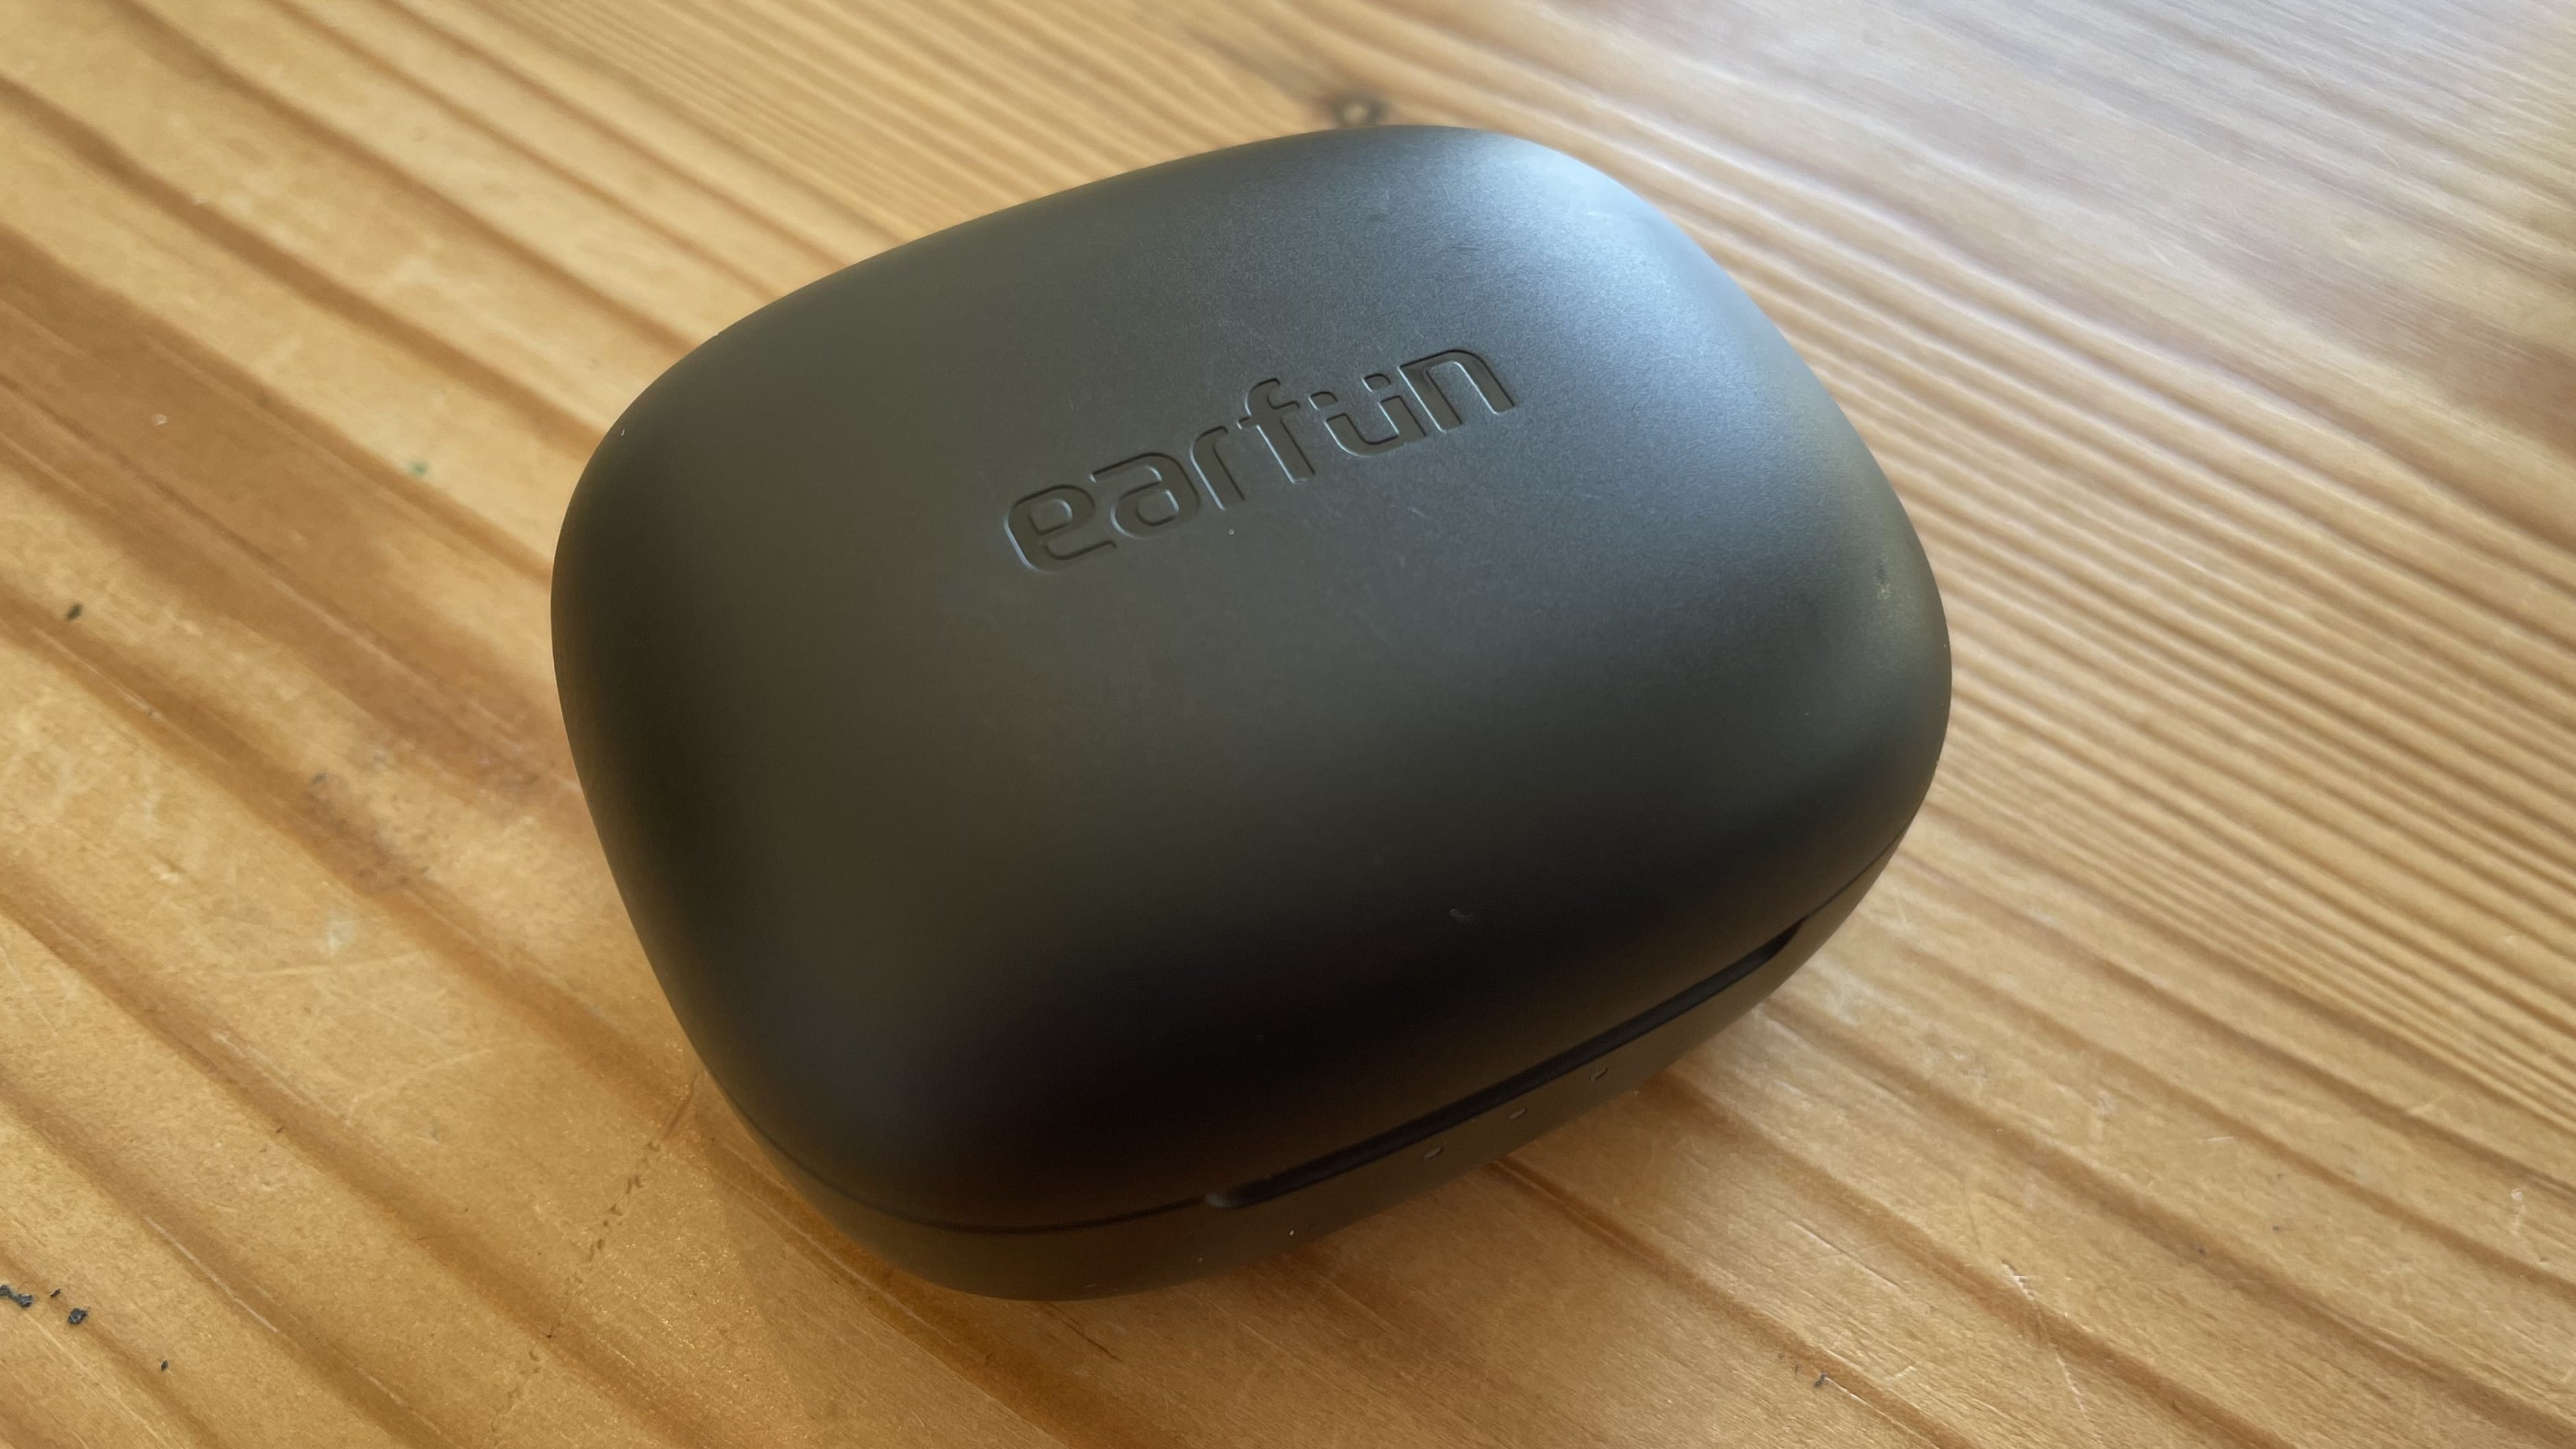 Earfun Air Pro 3 case closed on wooden table